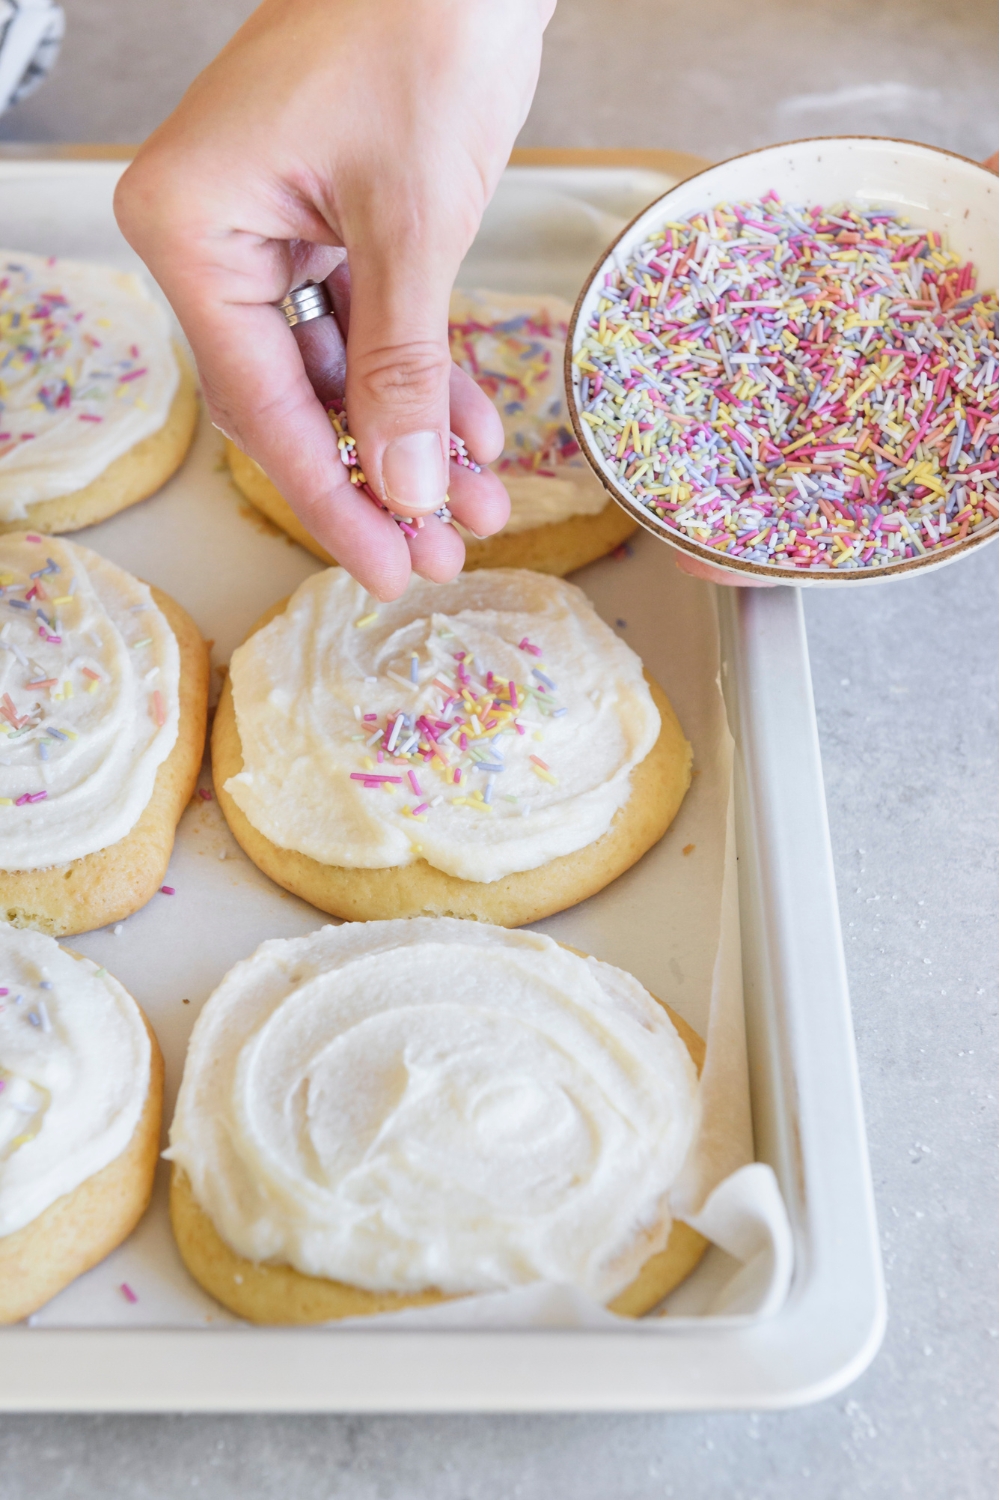 A baking sheet with sugar cookies with frosting. A hand is adding sprinkles to the cookies.